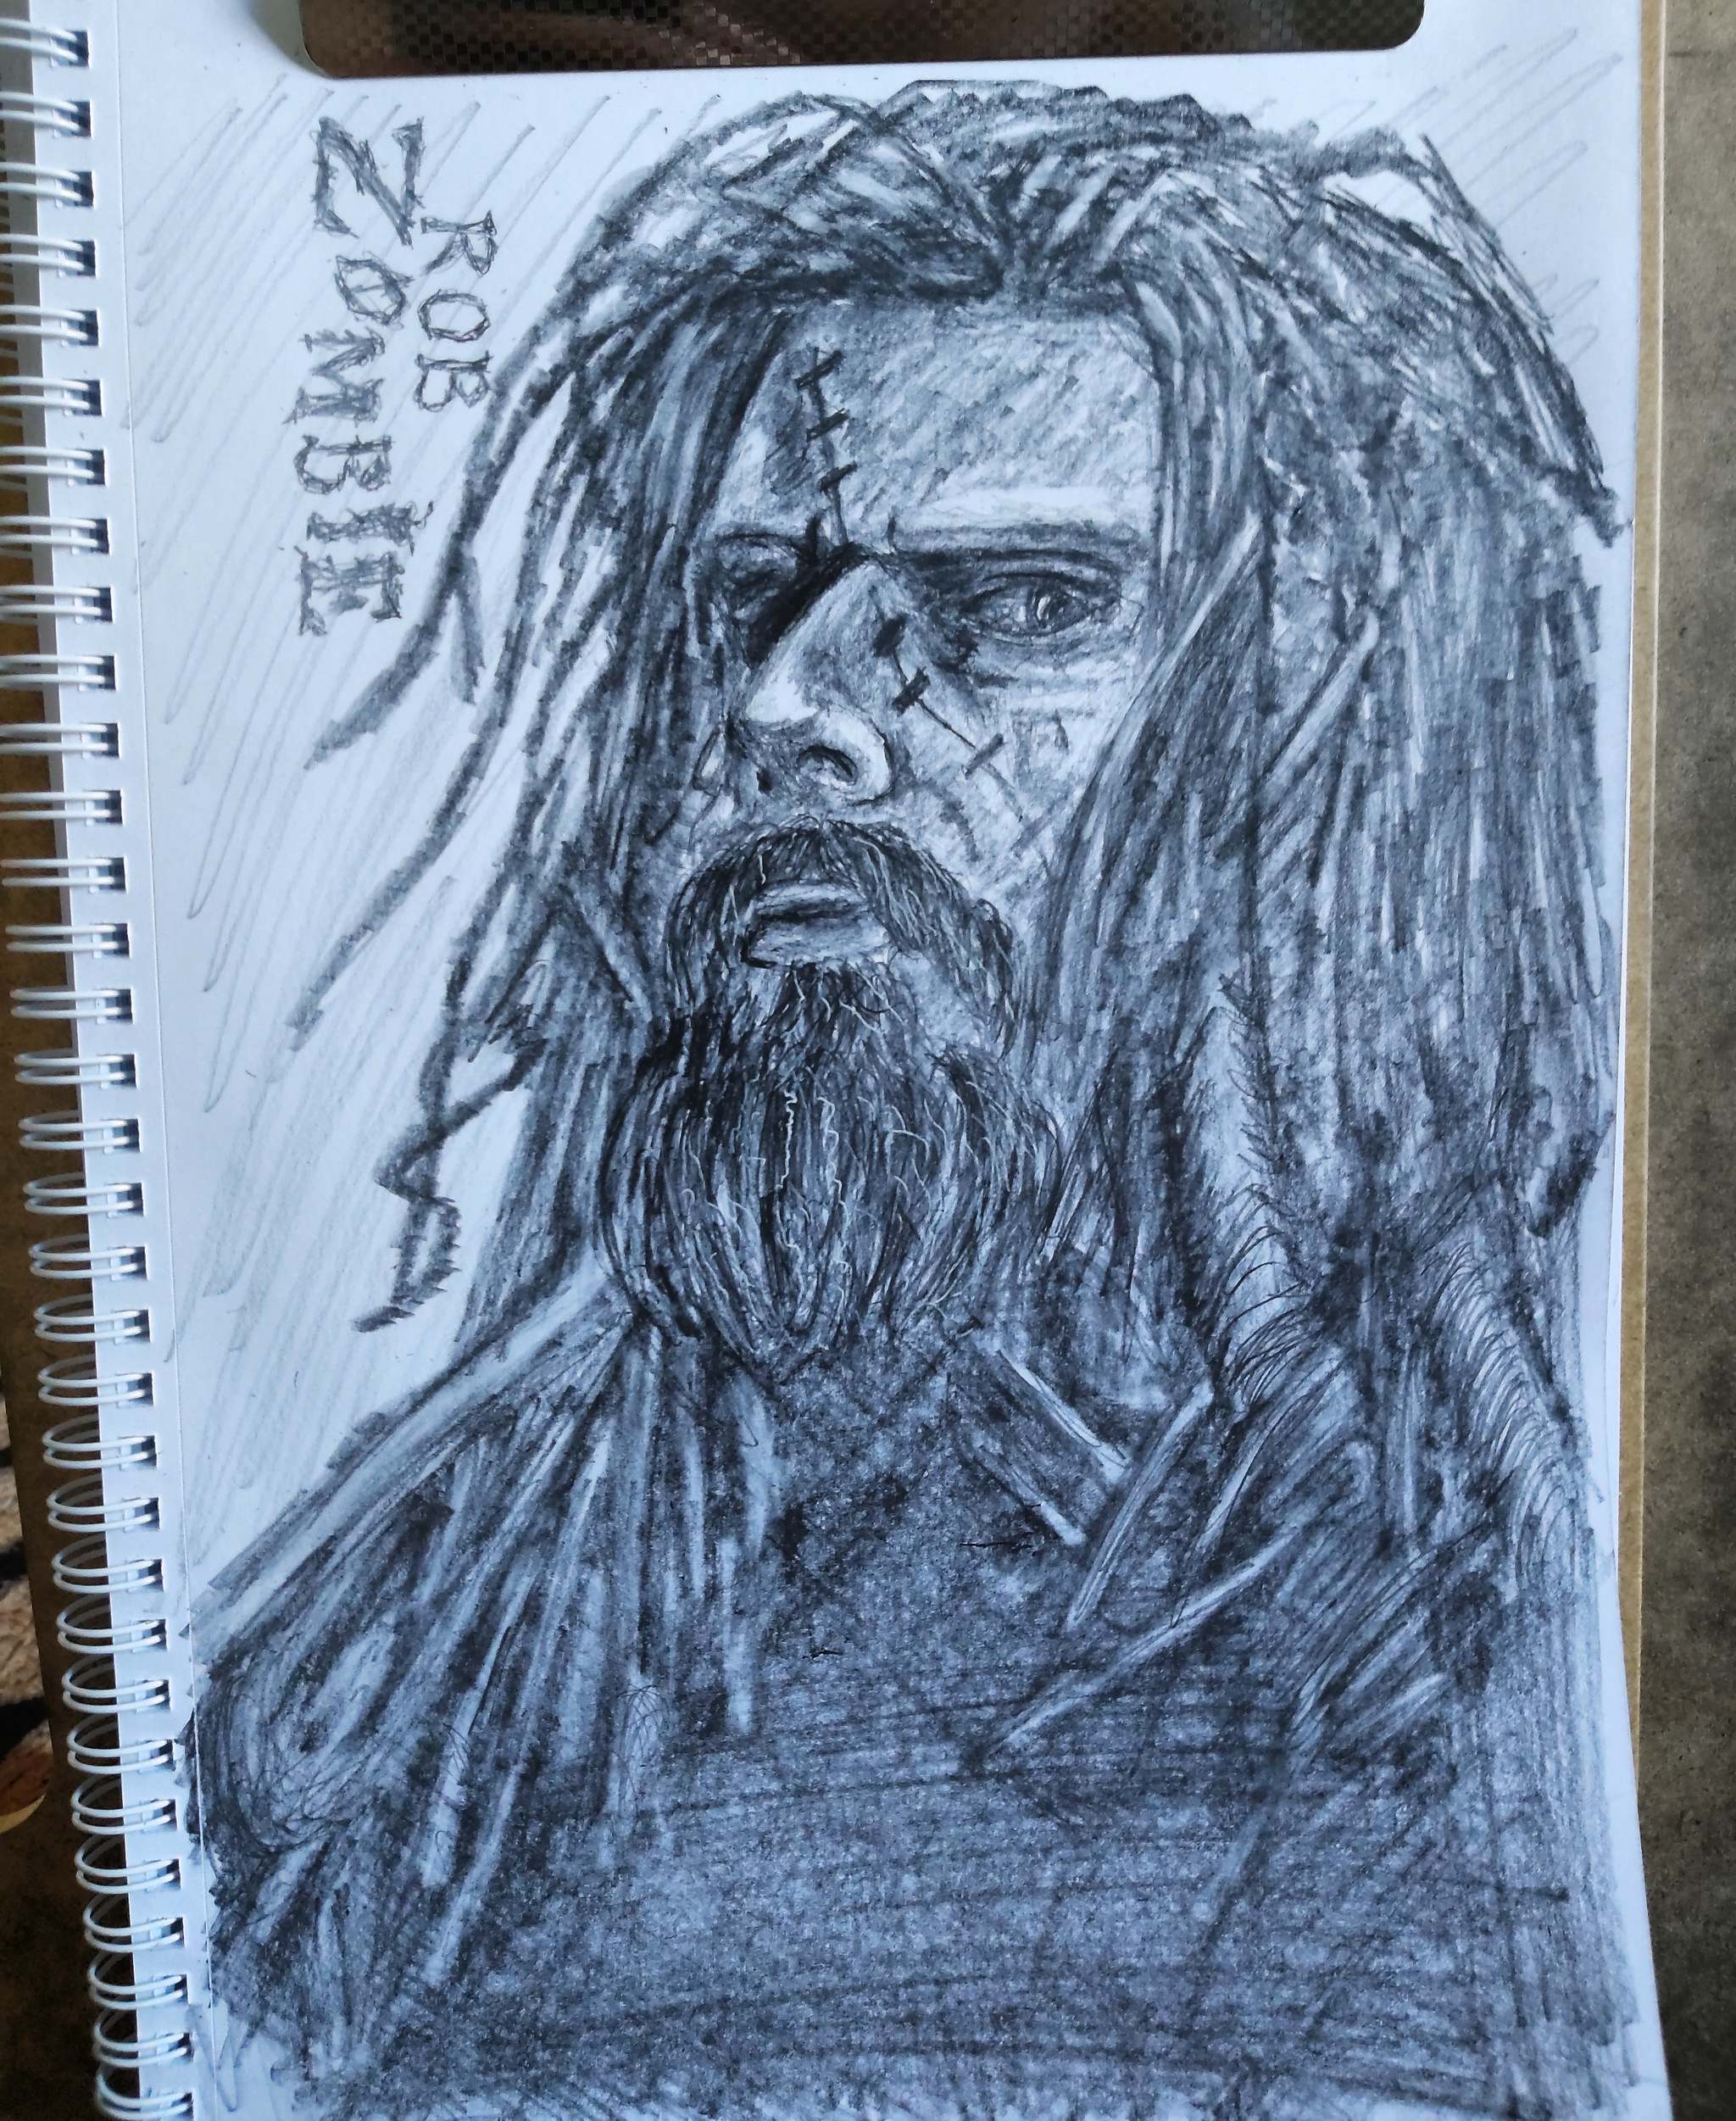 1 more musician - My, Sketch, Tattoo sketch, Sketch, Sketchbook, Rob Zombie, Musicians, Drawing, Pencil drawing